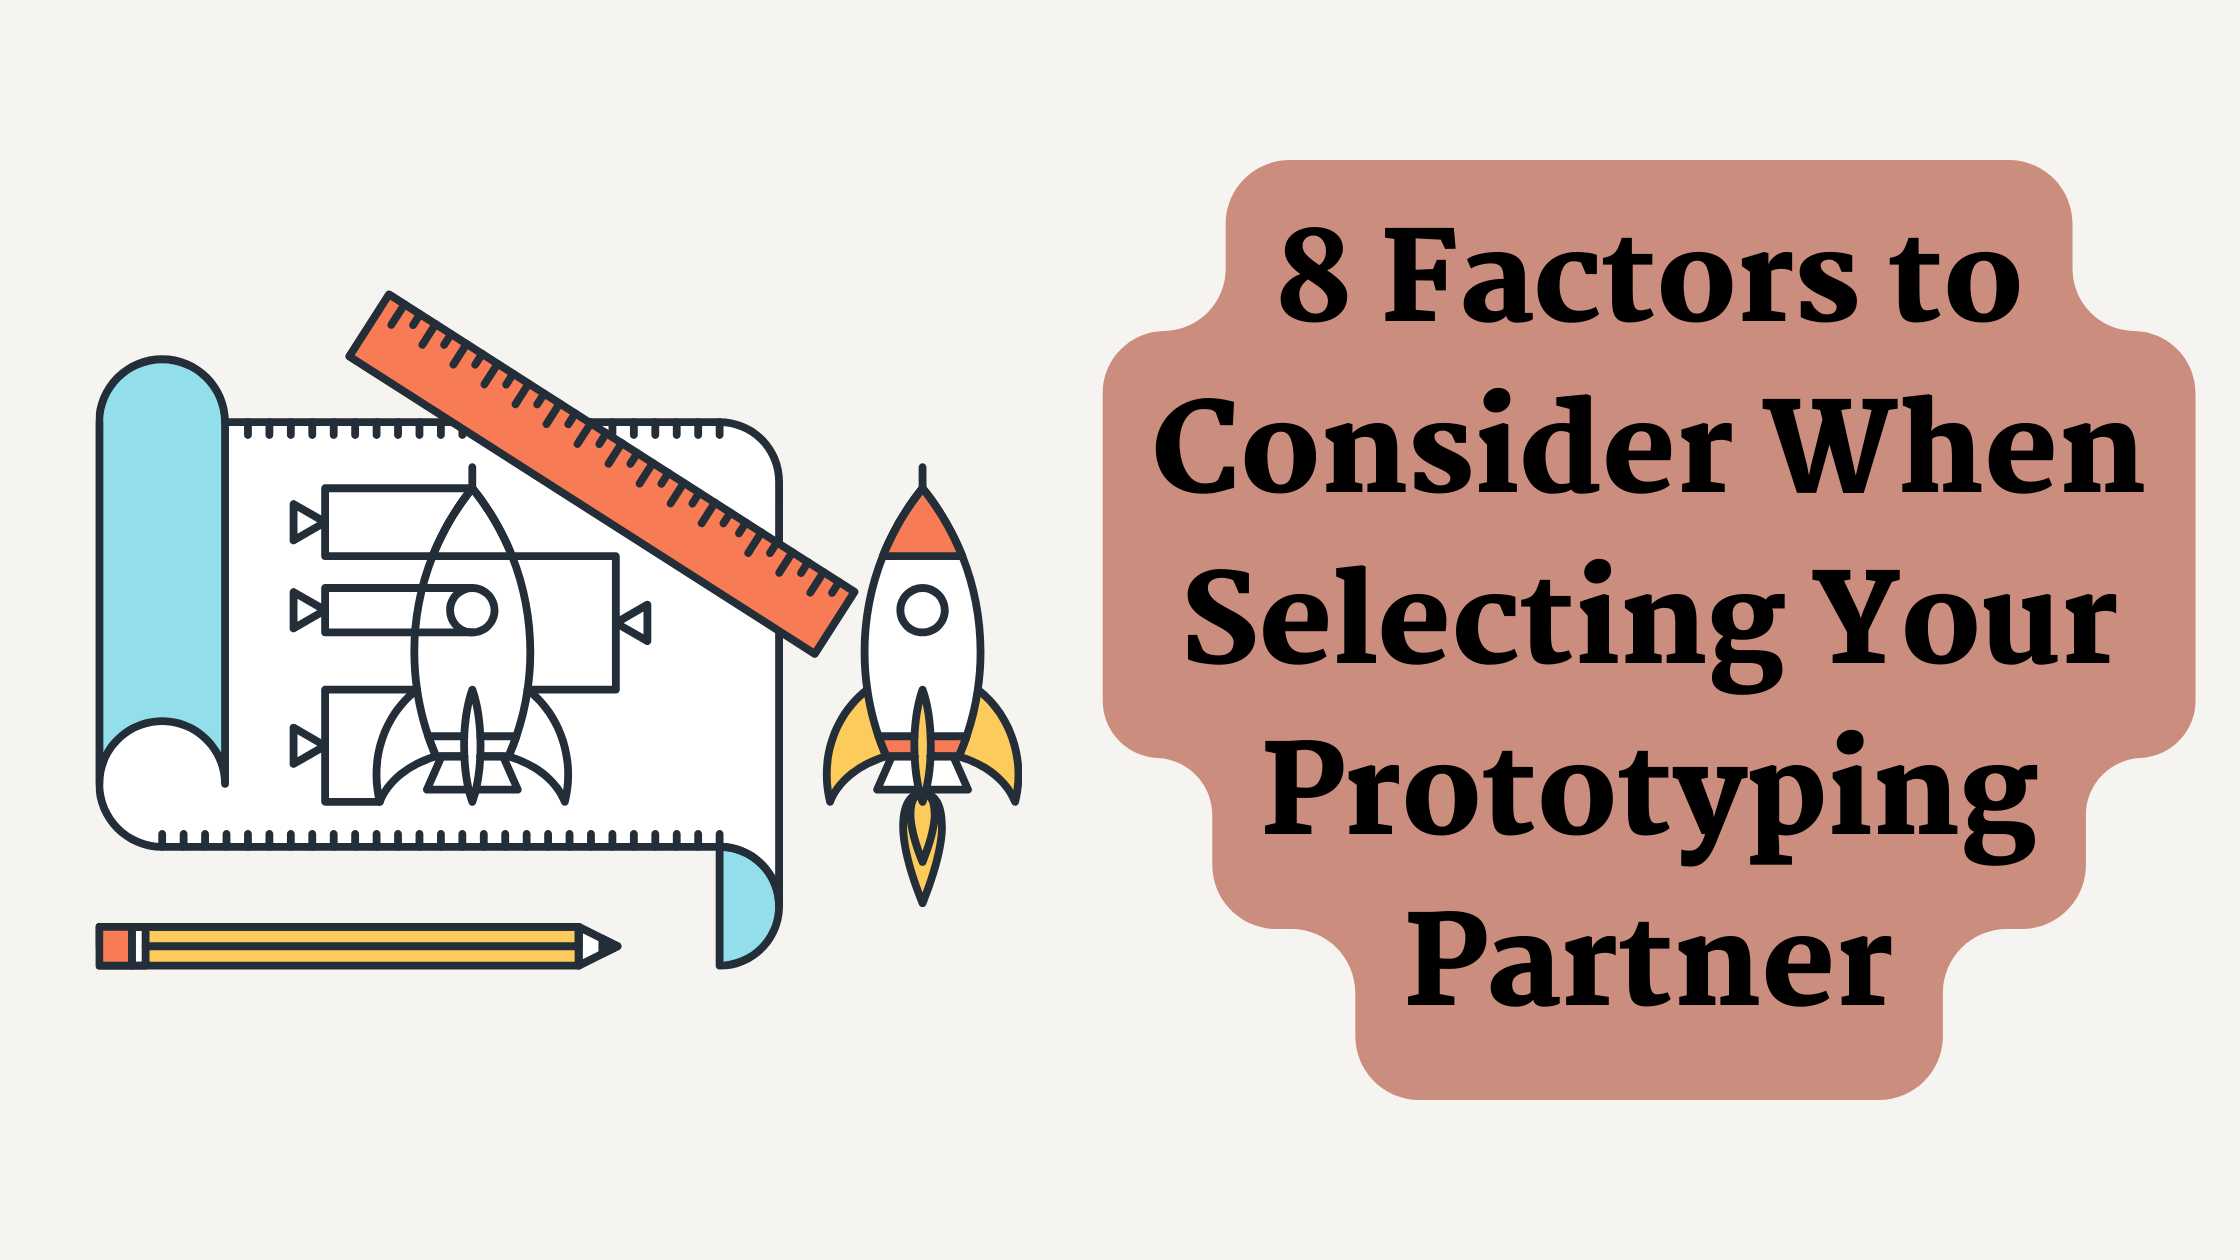 8 Factors to Consider When Selecting Your Prototyping Partner